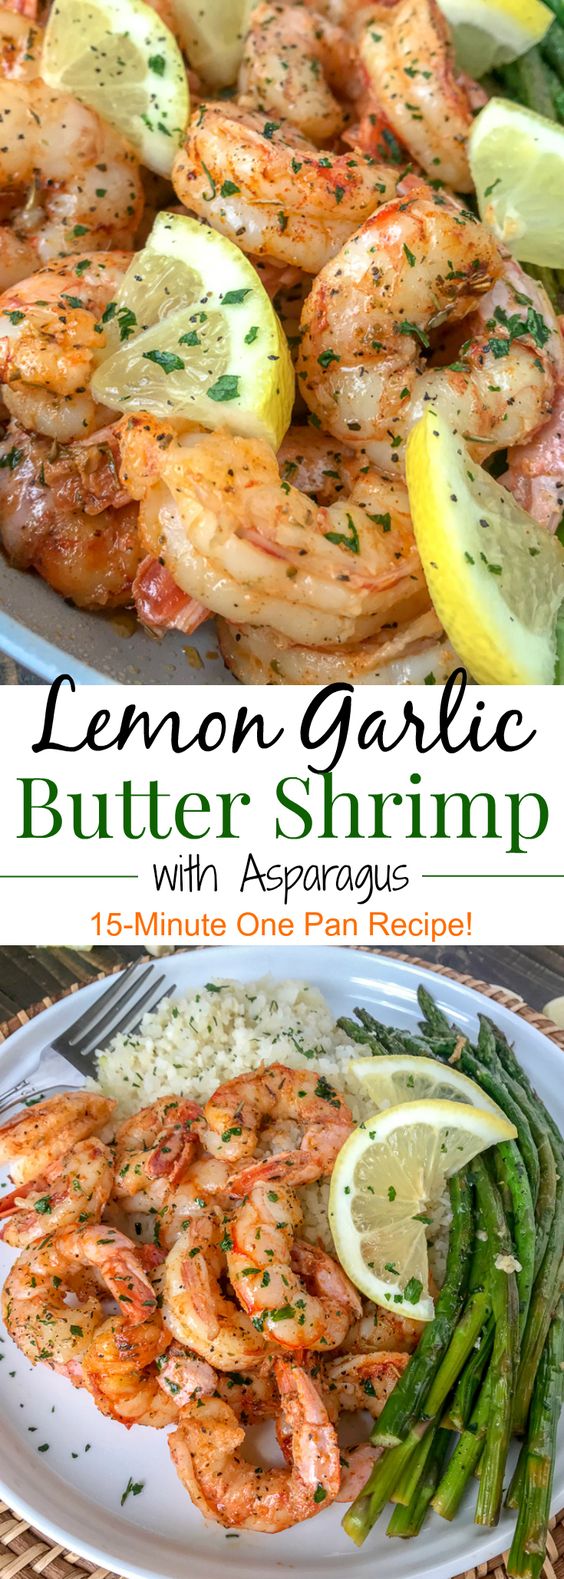 Lemon Garlic Butter Shrimp with Asparagus - this is an easy, light and healthy dinner option that is cooked in one pan and can be on your table in 15 minutes